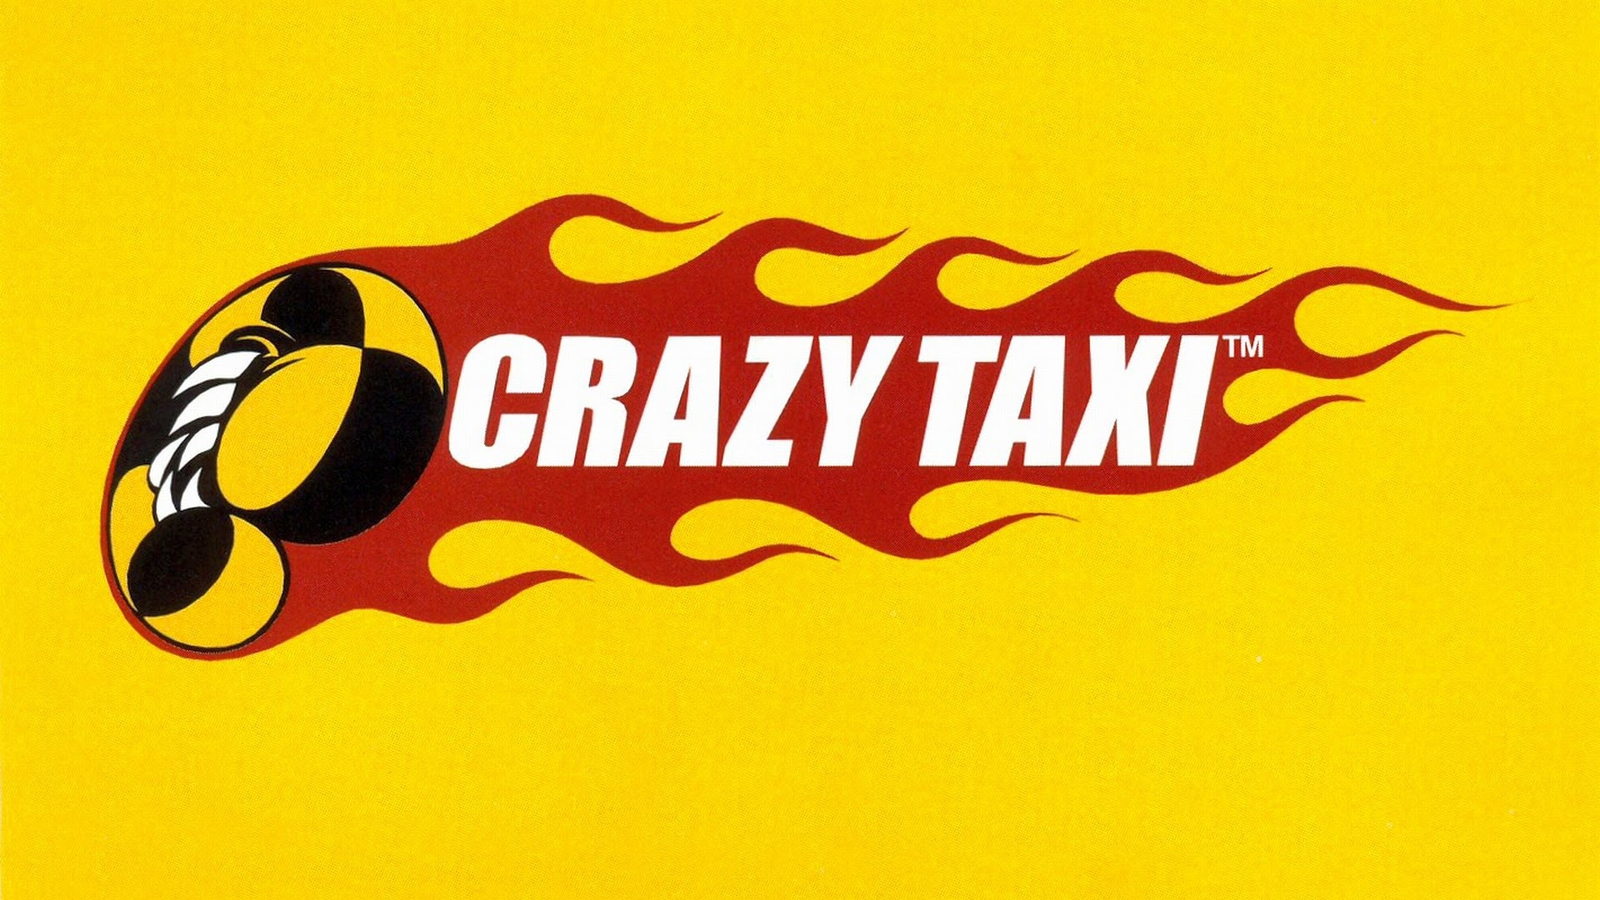 Sega reportedly has a Crazy Taxi reboot under way with Jet Set